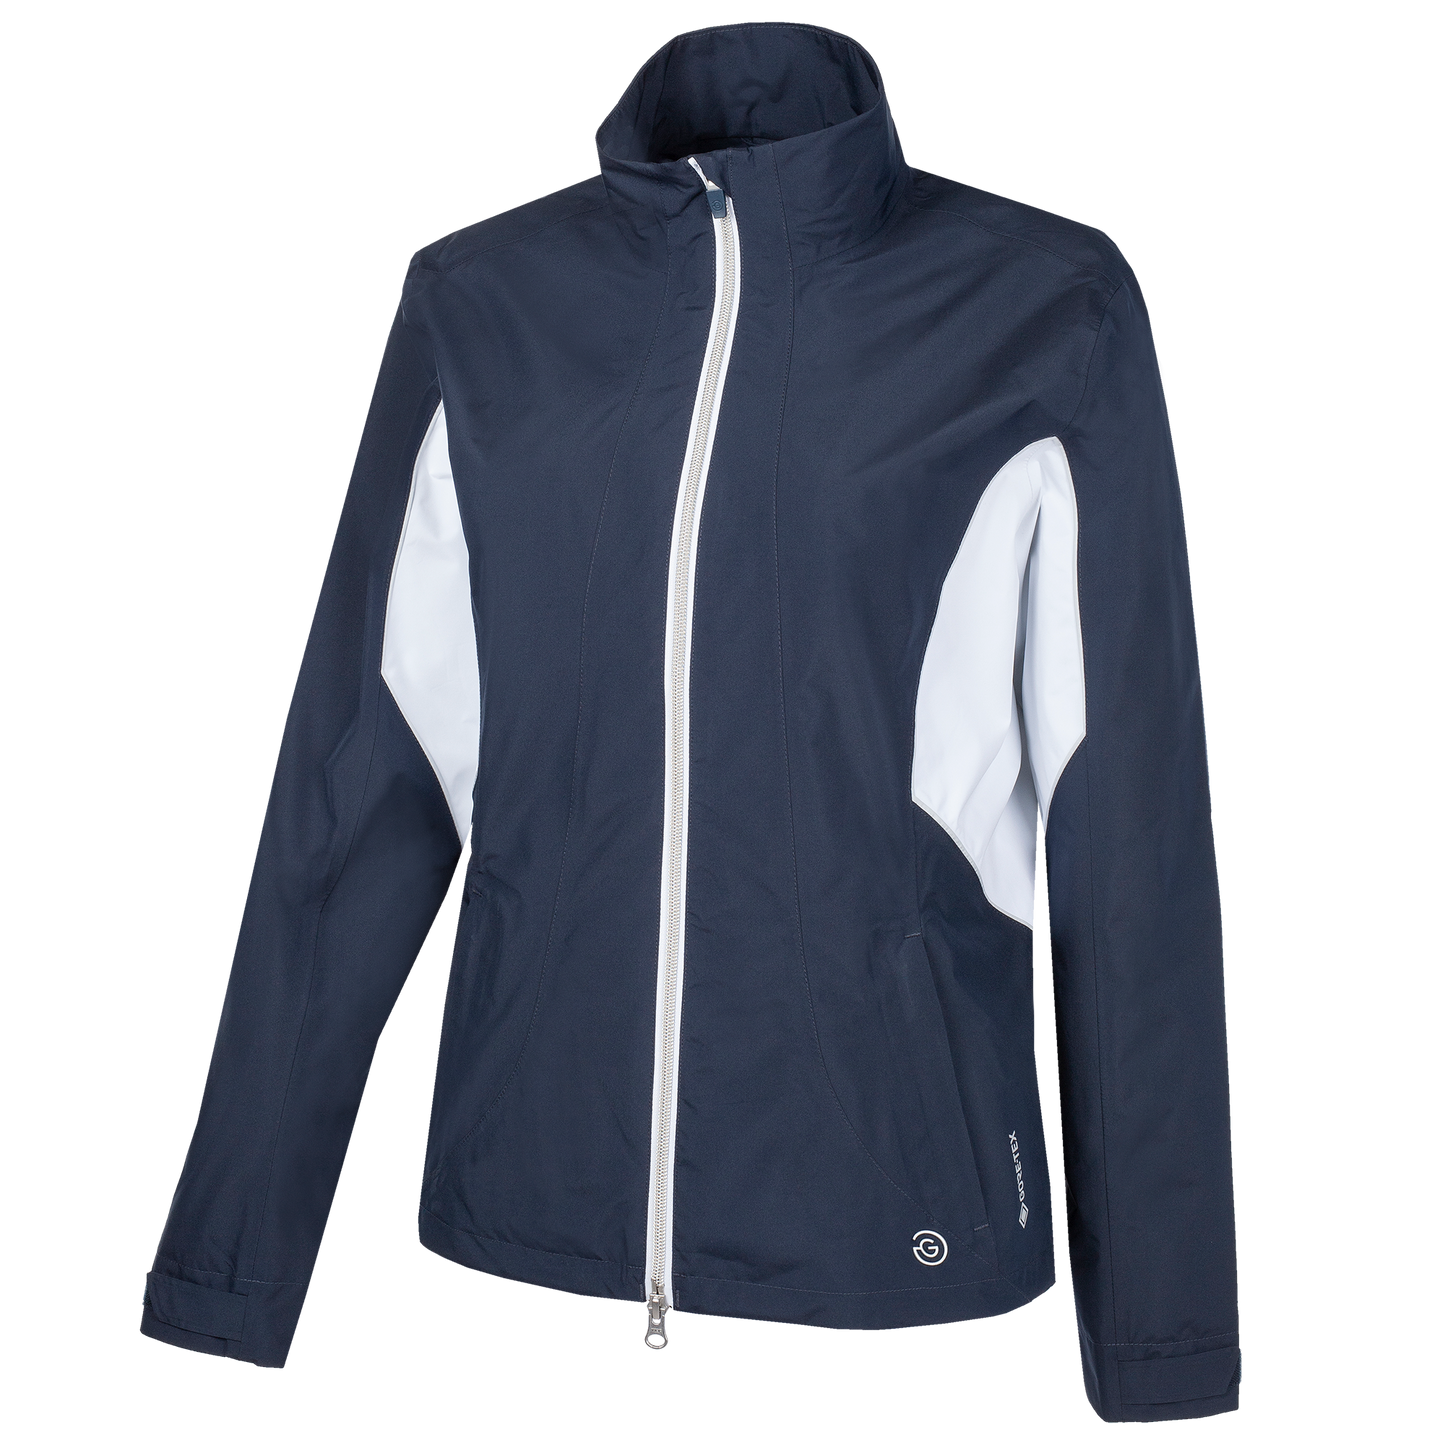 Galvin Green Ladies GORE-TEX Jacket with Lining in Navy and White